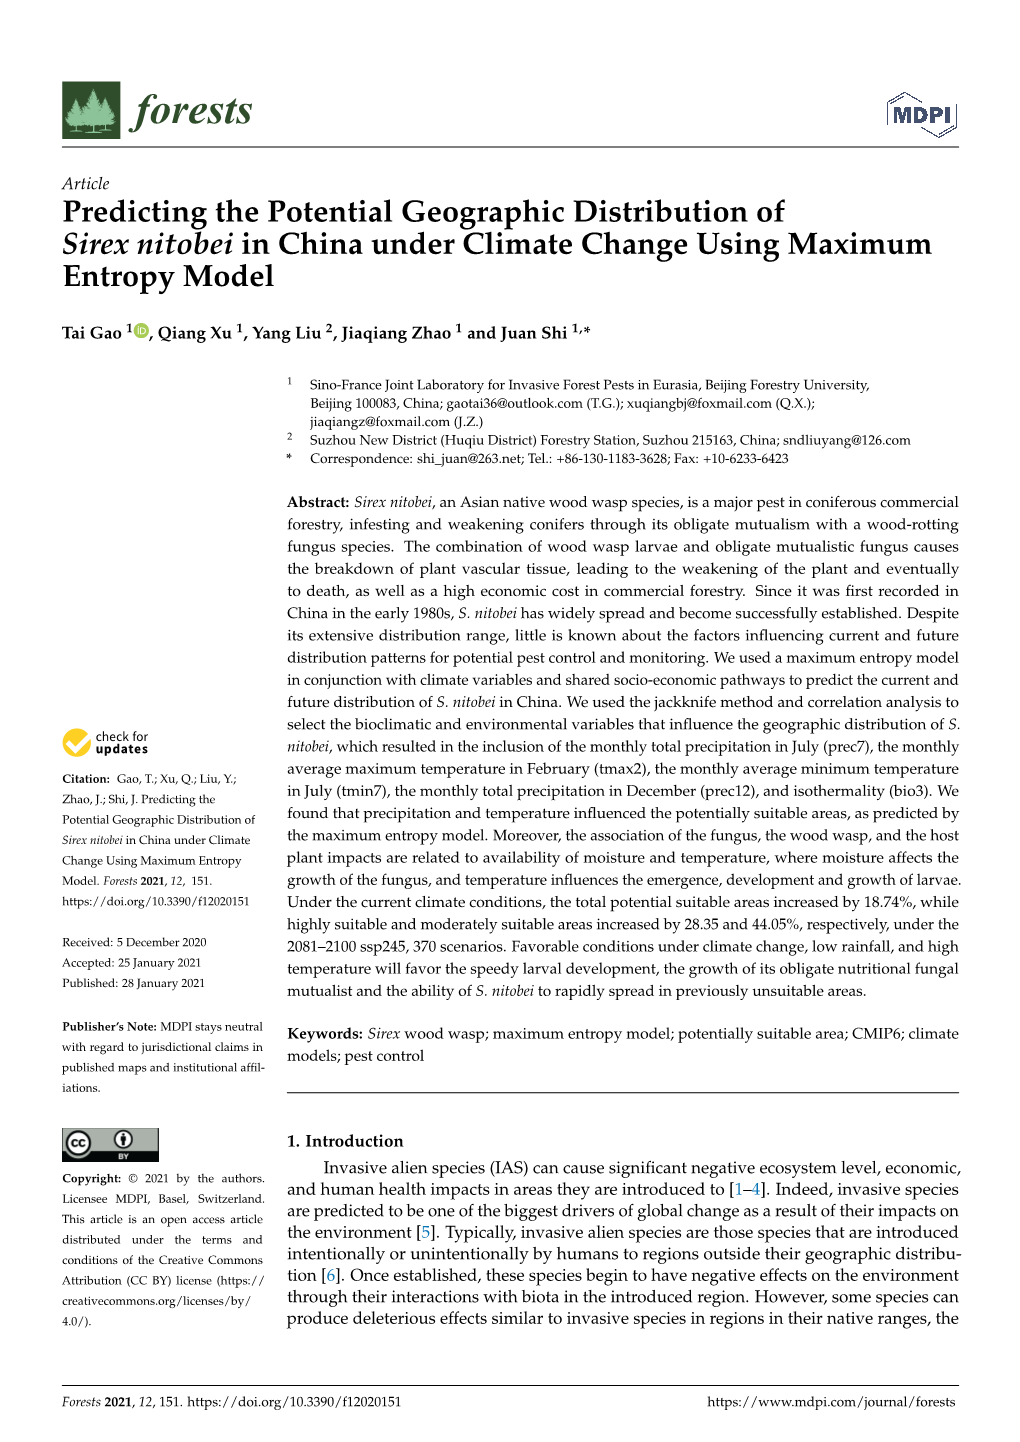 Predicting the Potential Geographic Distribution of Sirex Nitobei in China Under Climate Change Using Maximum Entropy Model